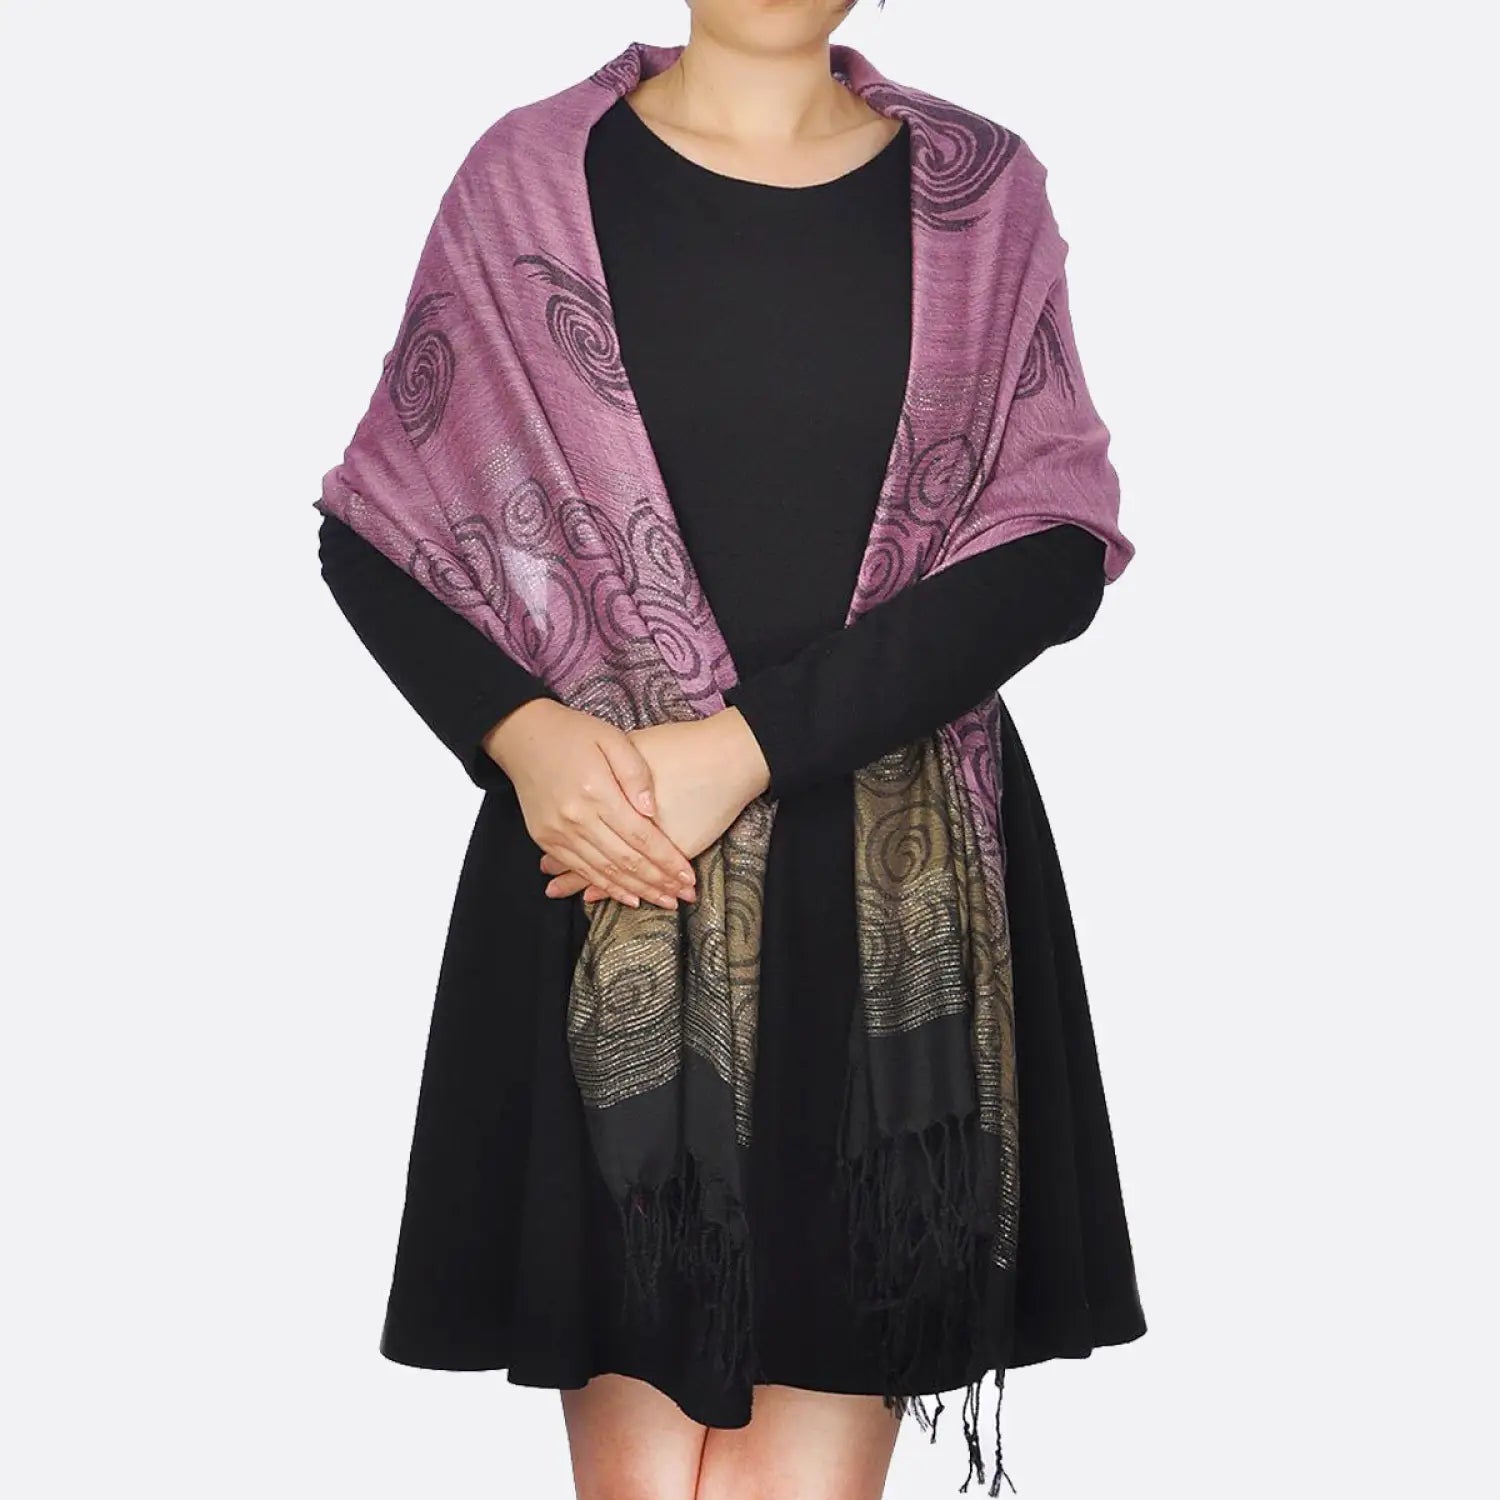 Elegant woman in purple scarf and black outfit from Glittery Two-Tone Ombre Tasselled Scarf Shawl.